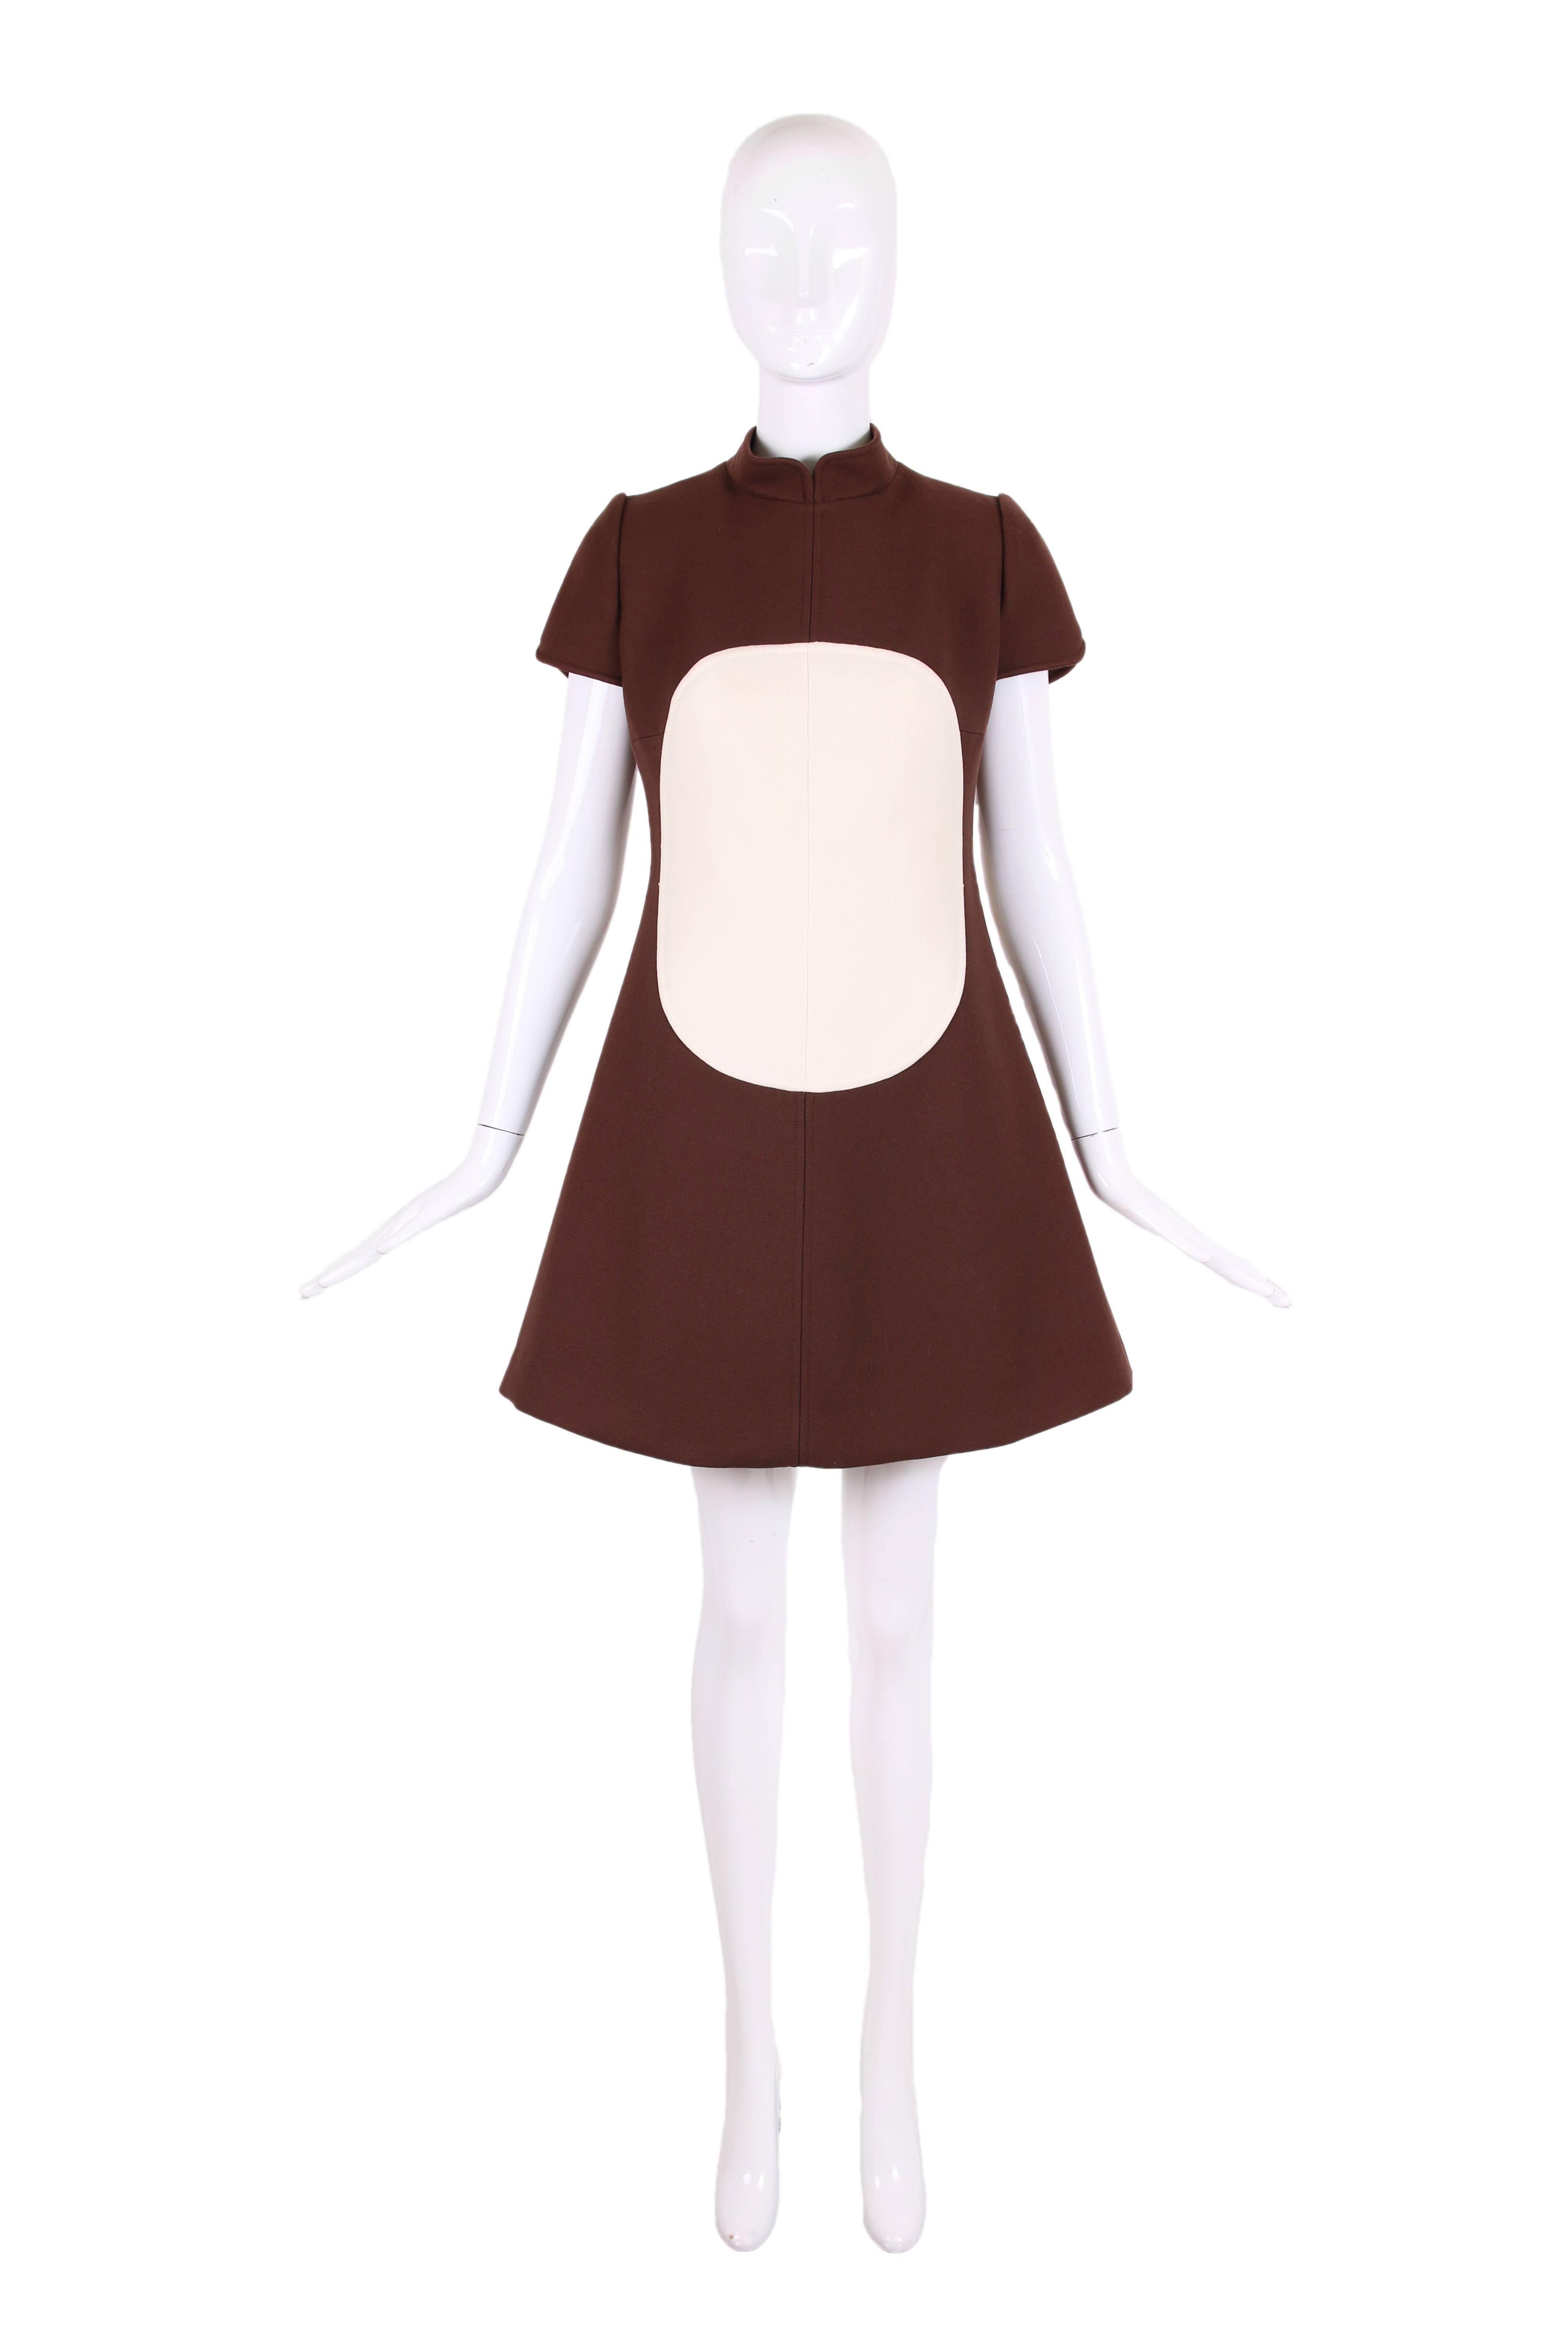 1960's Courreges for I. Magnin brown wool A-line mini dress w/cap sleeves, stand collar and creme circle motif at front and back. Zipper closure up center back. In excellent condition with very minor yellowing at interior lining under sleeve. There